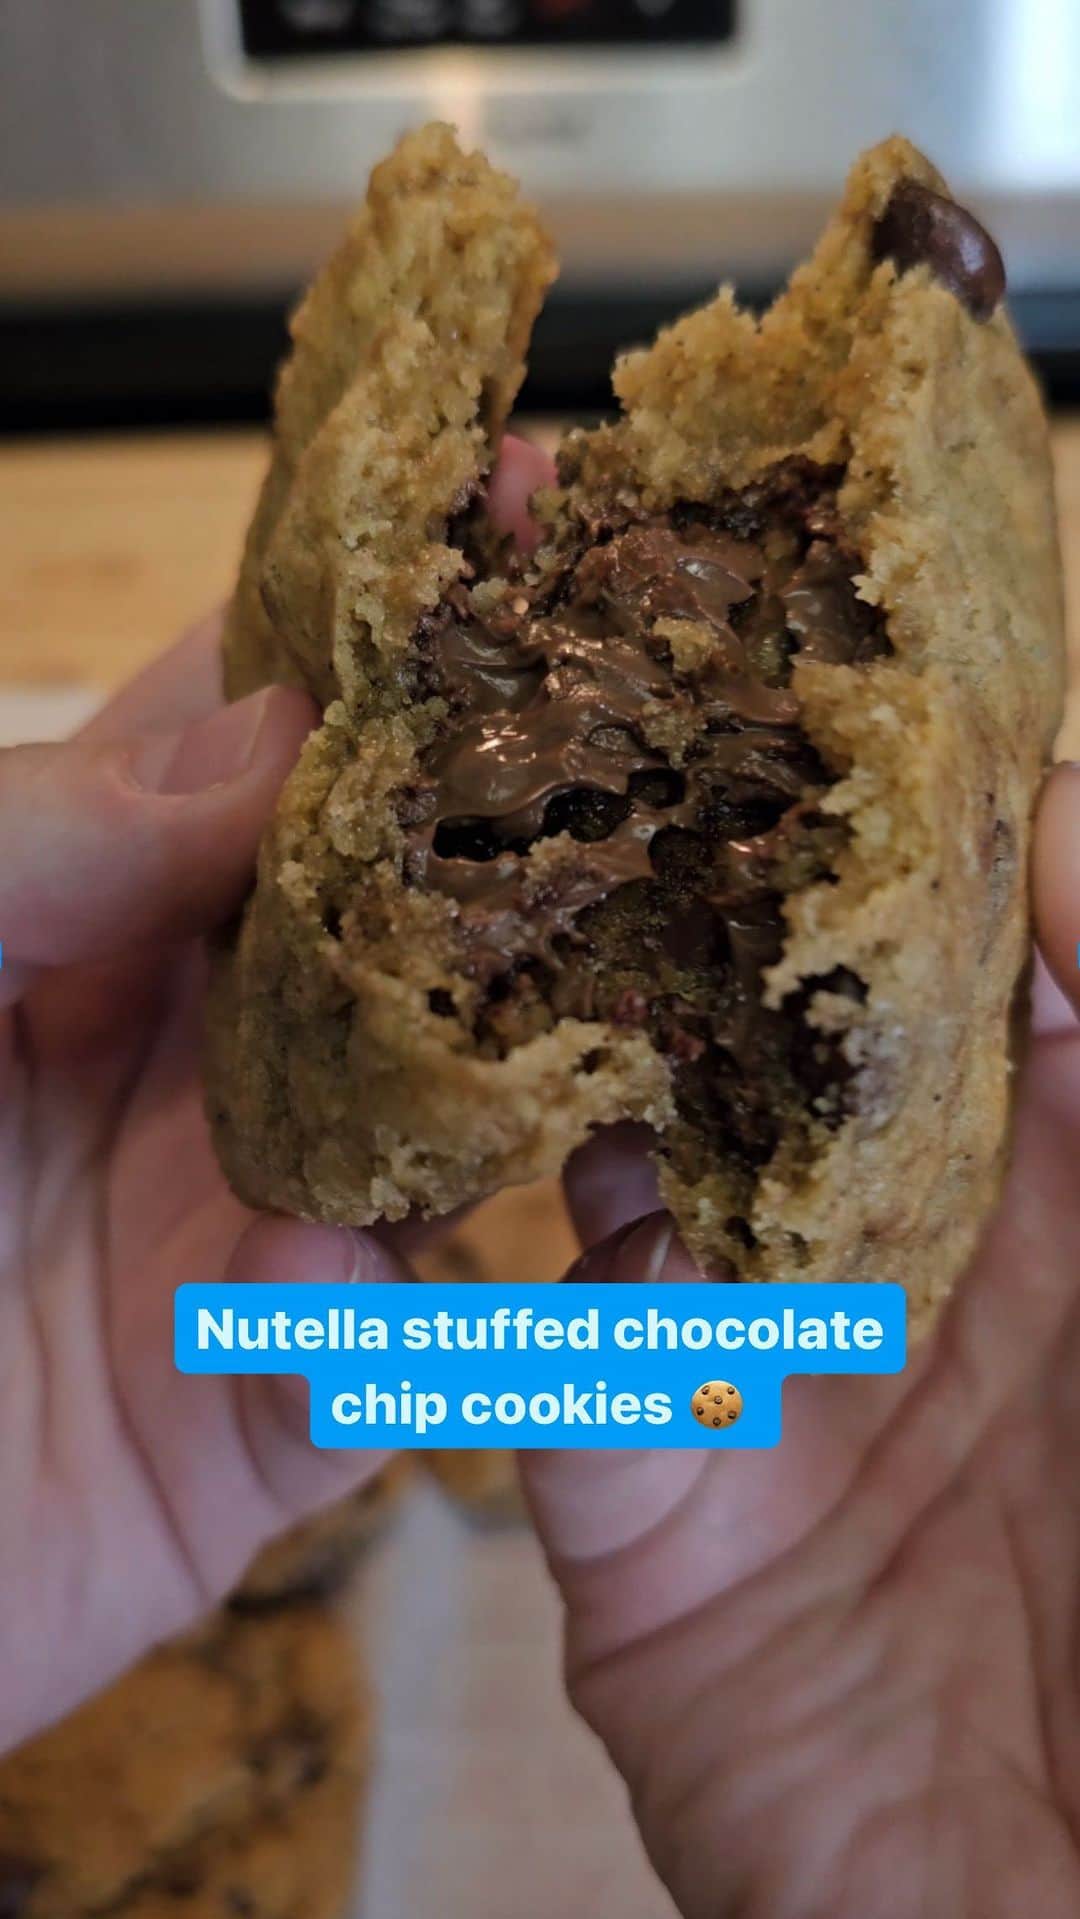 Wal-Mart Stores, Incのインスタグラム：「DIBS on the cookie in the bottom right corner! 🍪🤤 @clintonsvatos #Cookies #Nutella #CookieRecipeIngredients: 1-1/2 C all-purpose flour 1/2 C chocolate chips 1/2 C browned butter 1/3 C brown sugar 1/3 C cane sugar 2 large eggs 12 tsp. Nutella for filling 2 tsp. vanilla 1 tsp. baking soda 1 tsp. baking powder 1/2 tsp. salt」